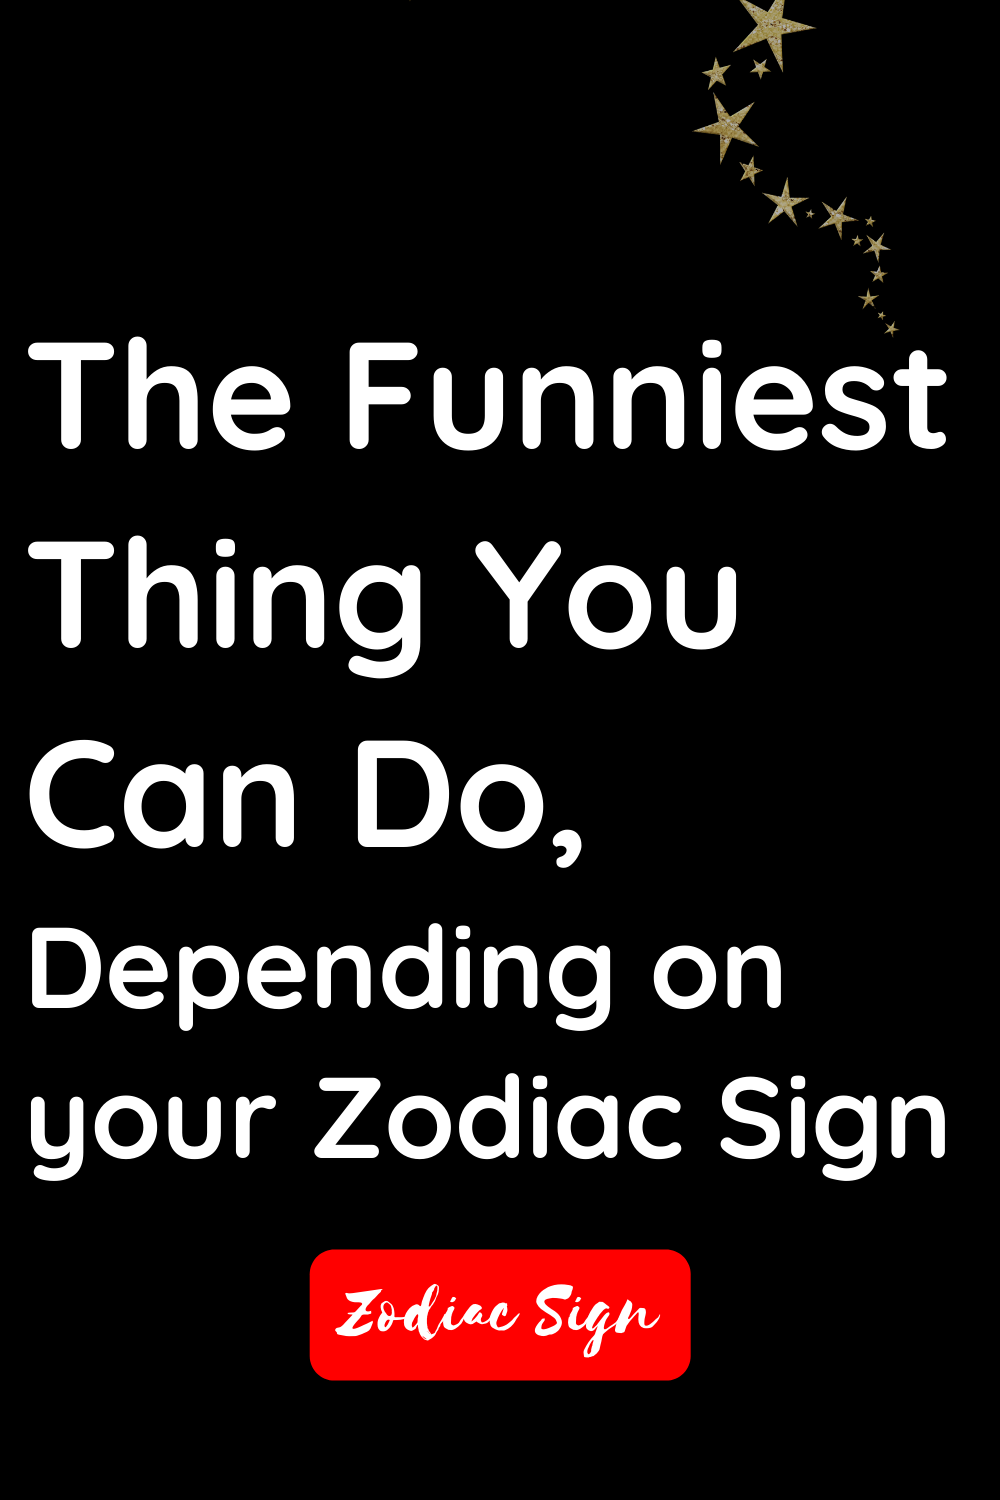 The funniest thing you can do, depending on your zodiac sign